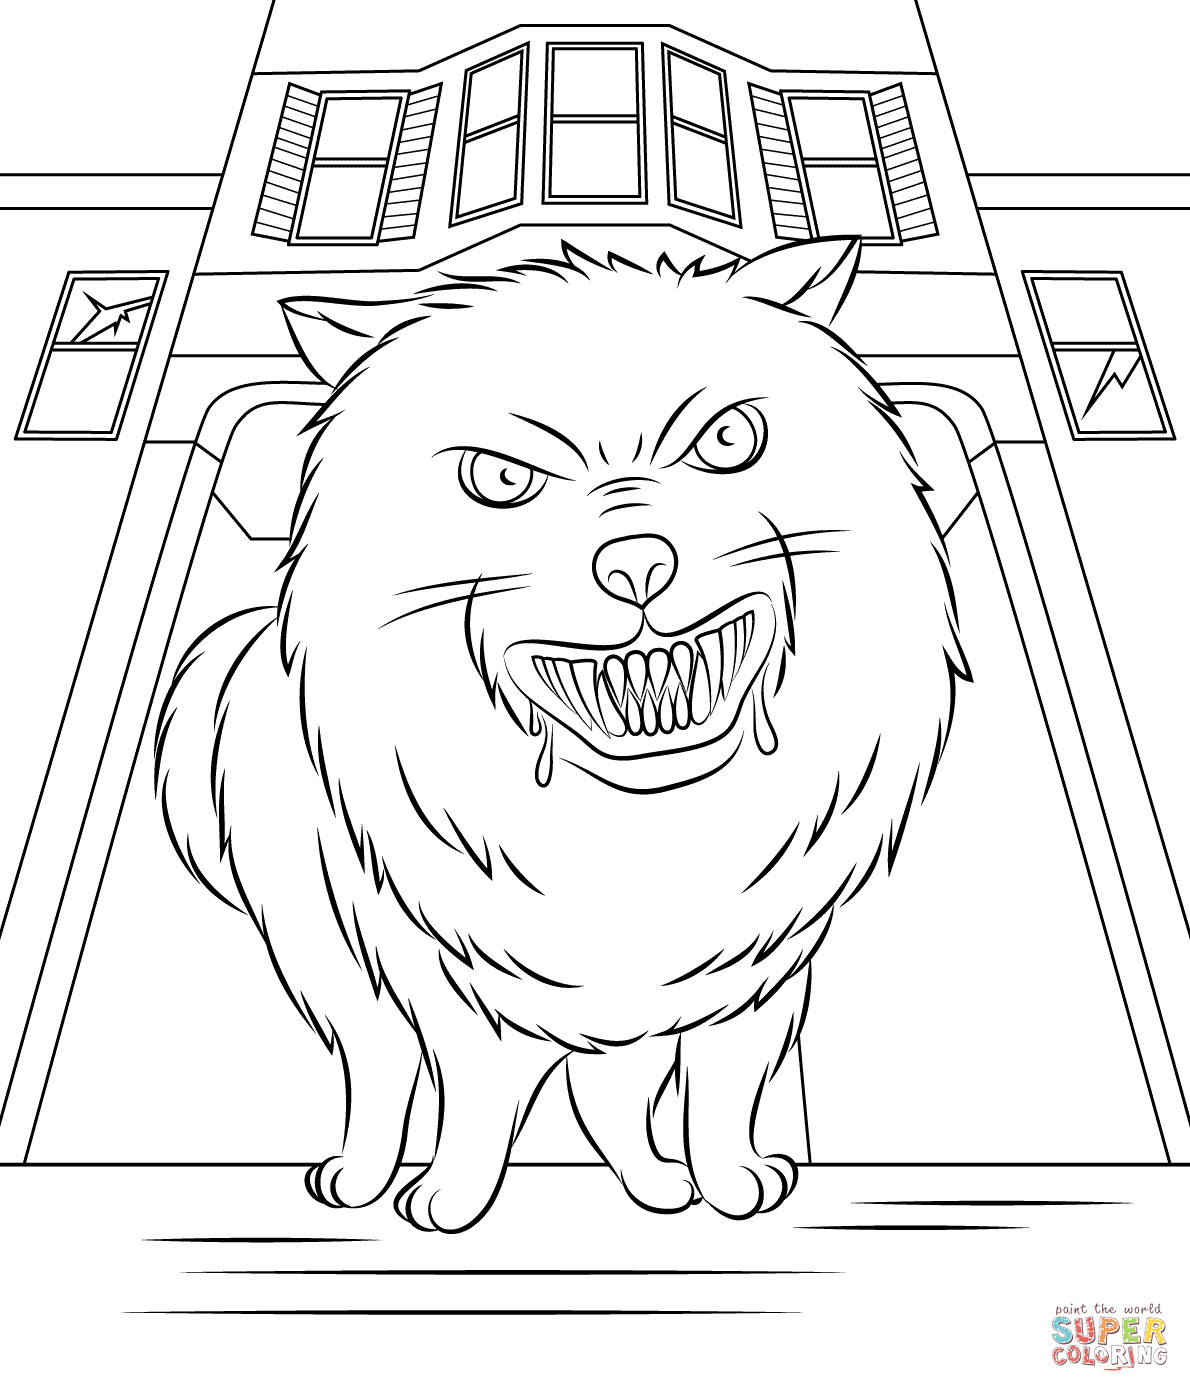 Goosebumps Coloring Pages Printable
 Goosebumps Horrorland coloring page